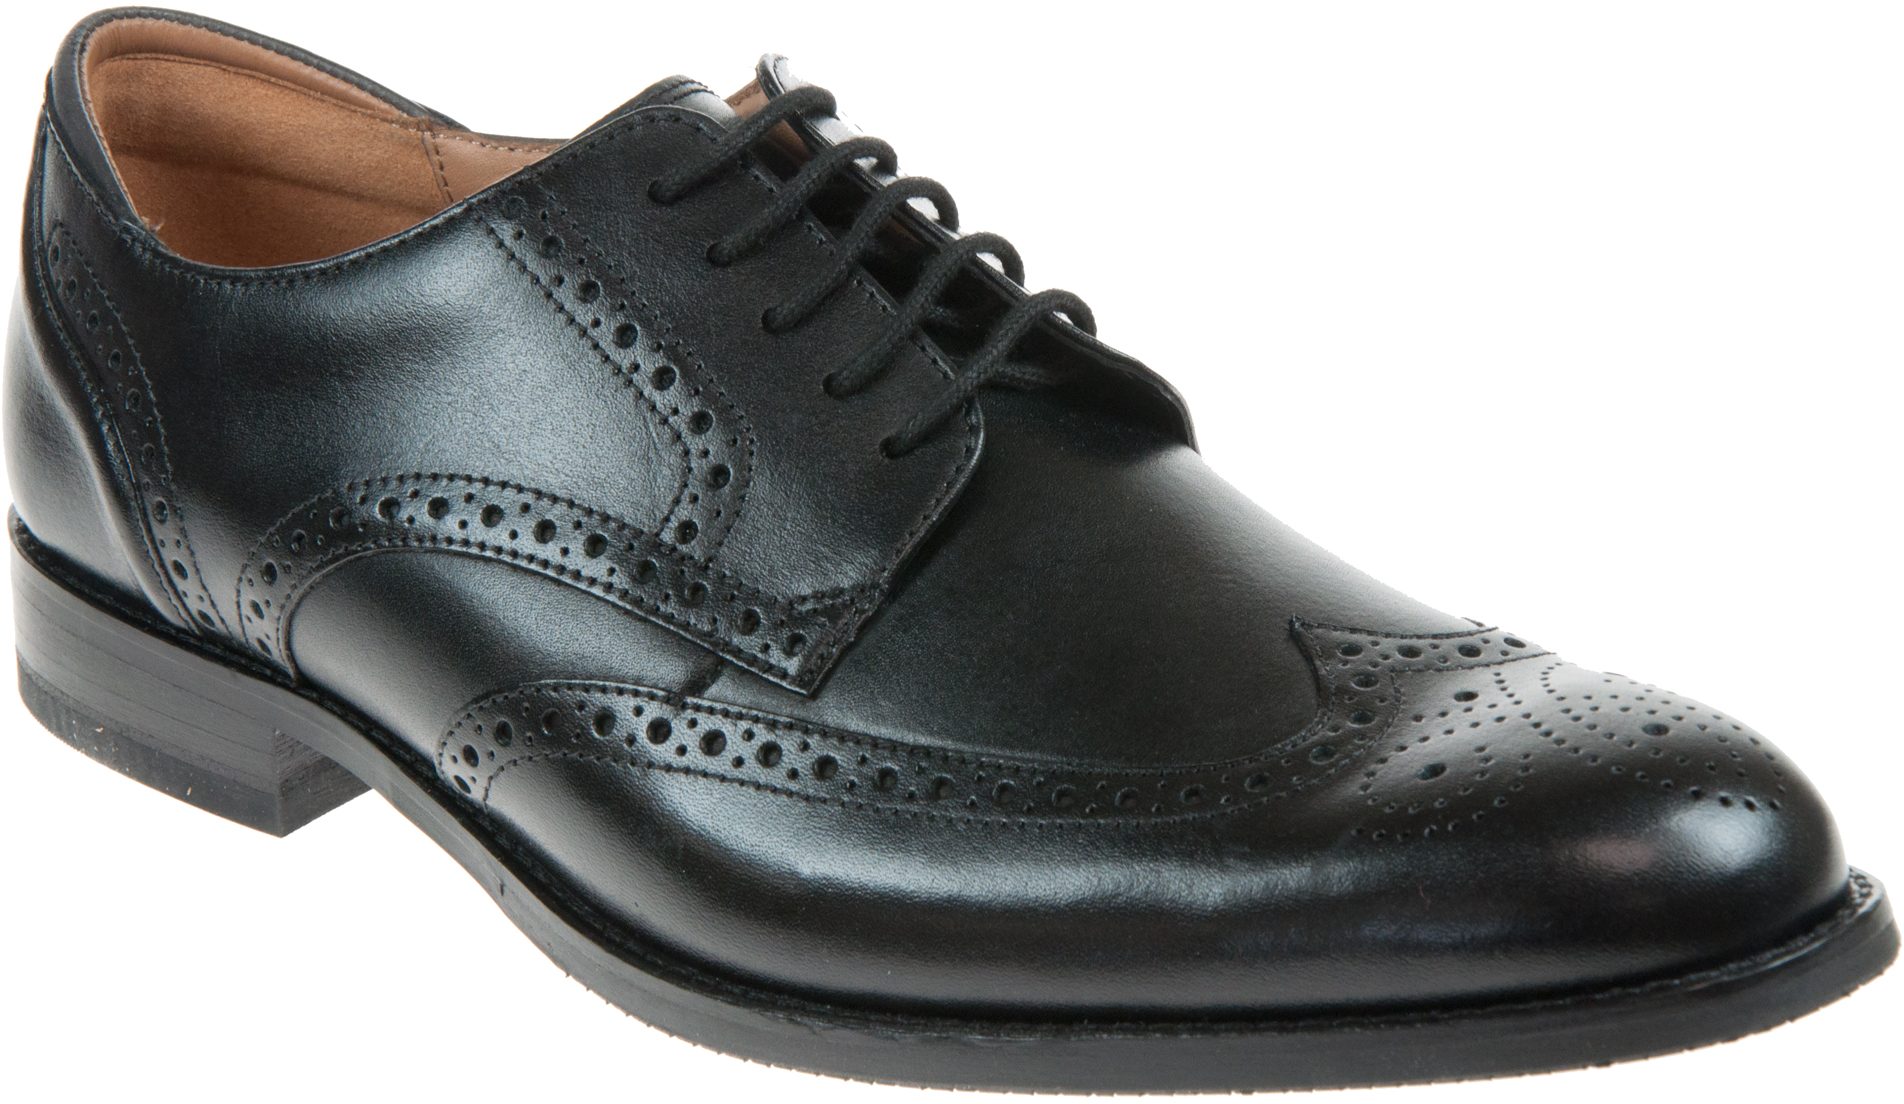 Clarks Craft Arlo Limit Black Leather 26171452 - Formal Shoes ...